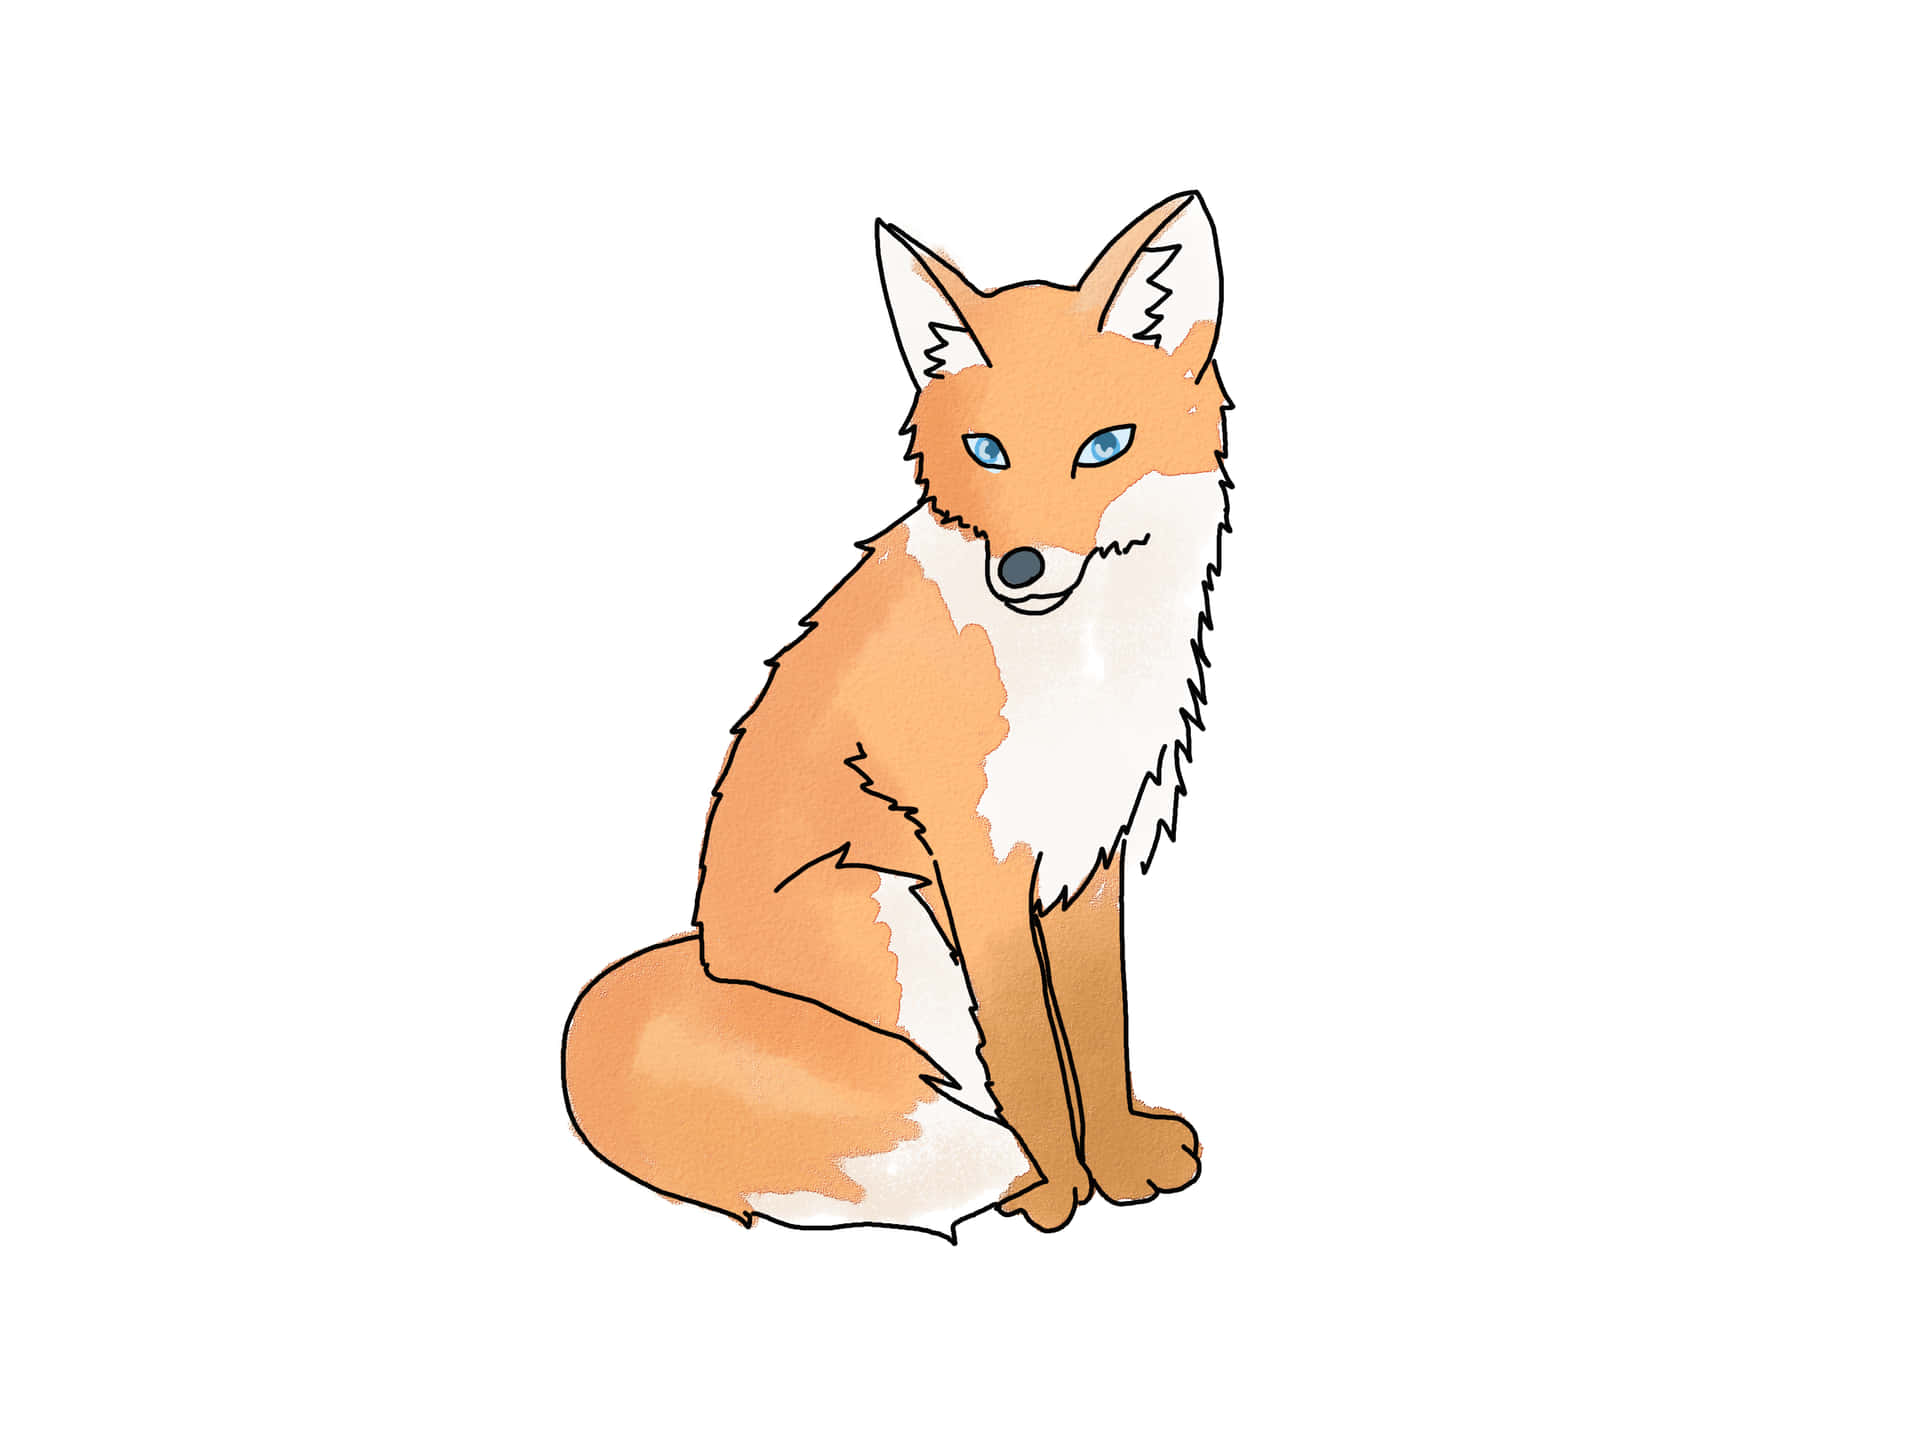 A Fox With Blue Eyes Sitting Down On A White Background